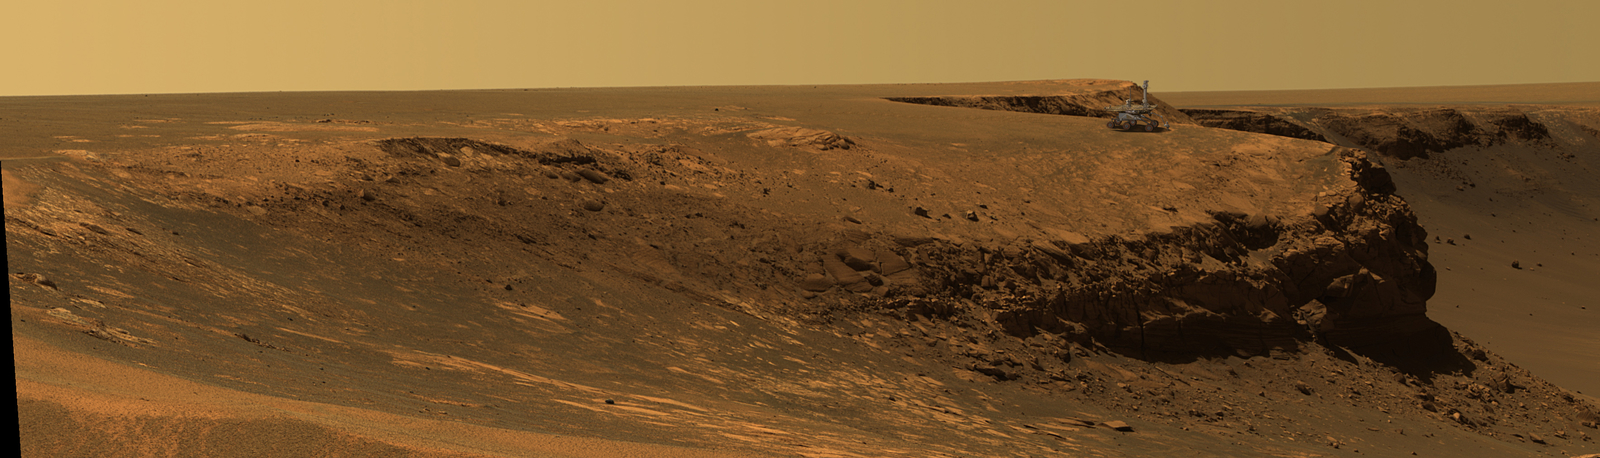 This image superimposes an artist's concept of the Mars Exploration Rover Opportunity on the rim of Victoria Crater. It is done to give a sense of scale.